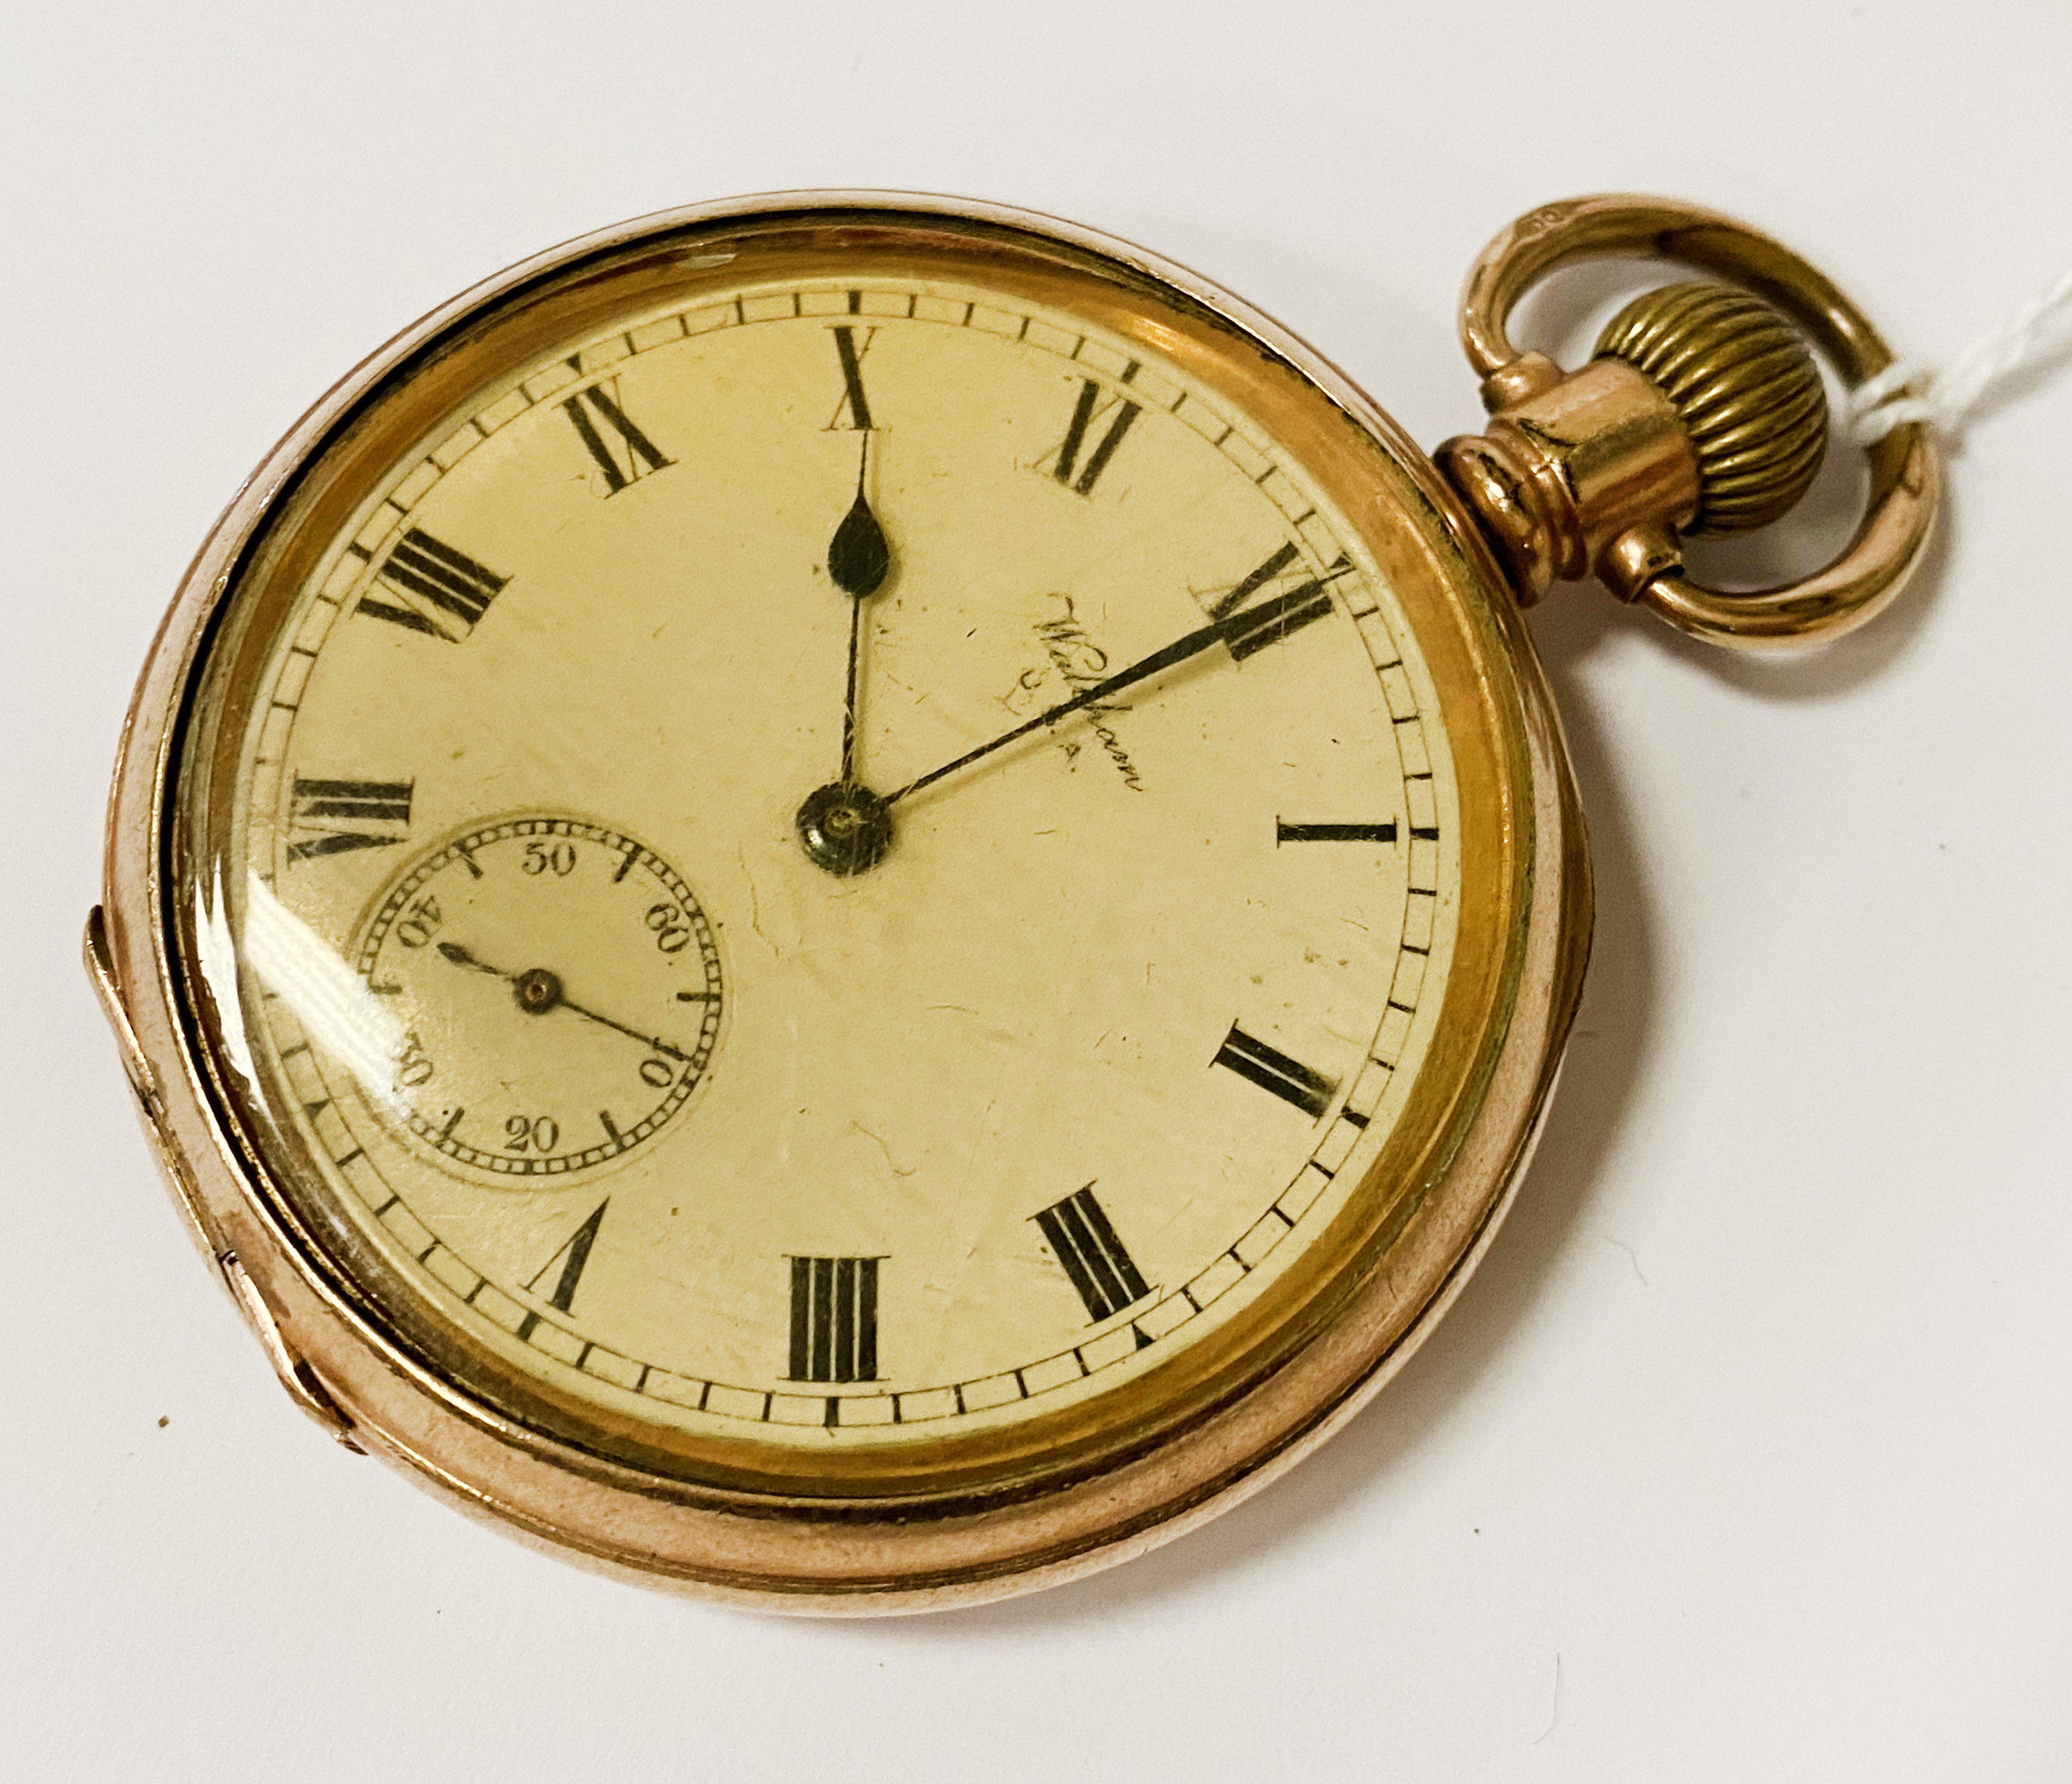 GOLD PLATED WALTHAM POCKET WATCH